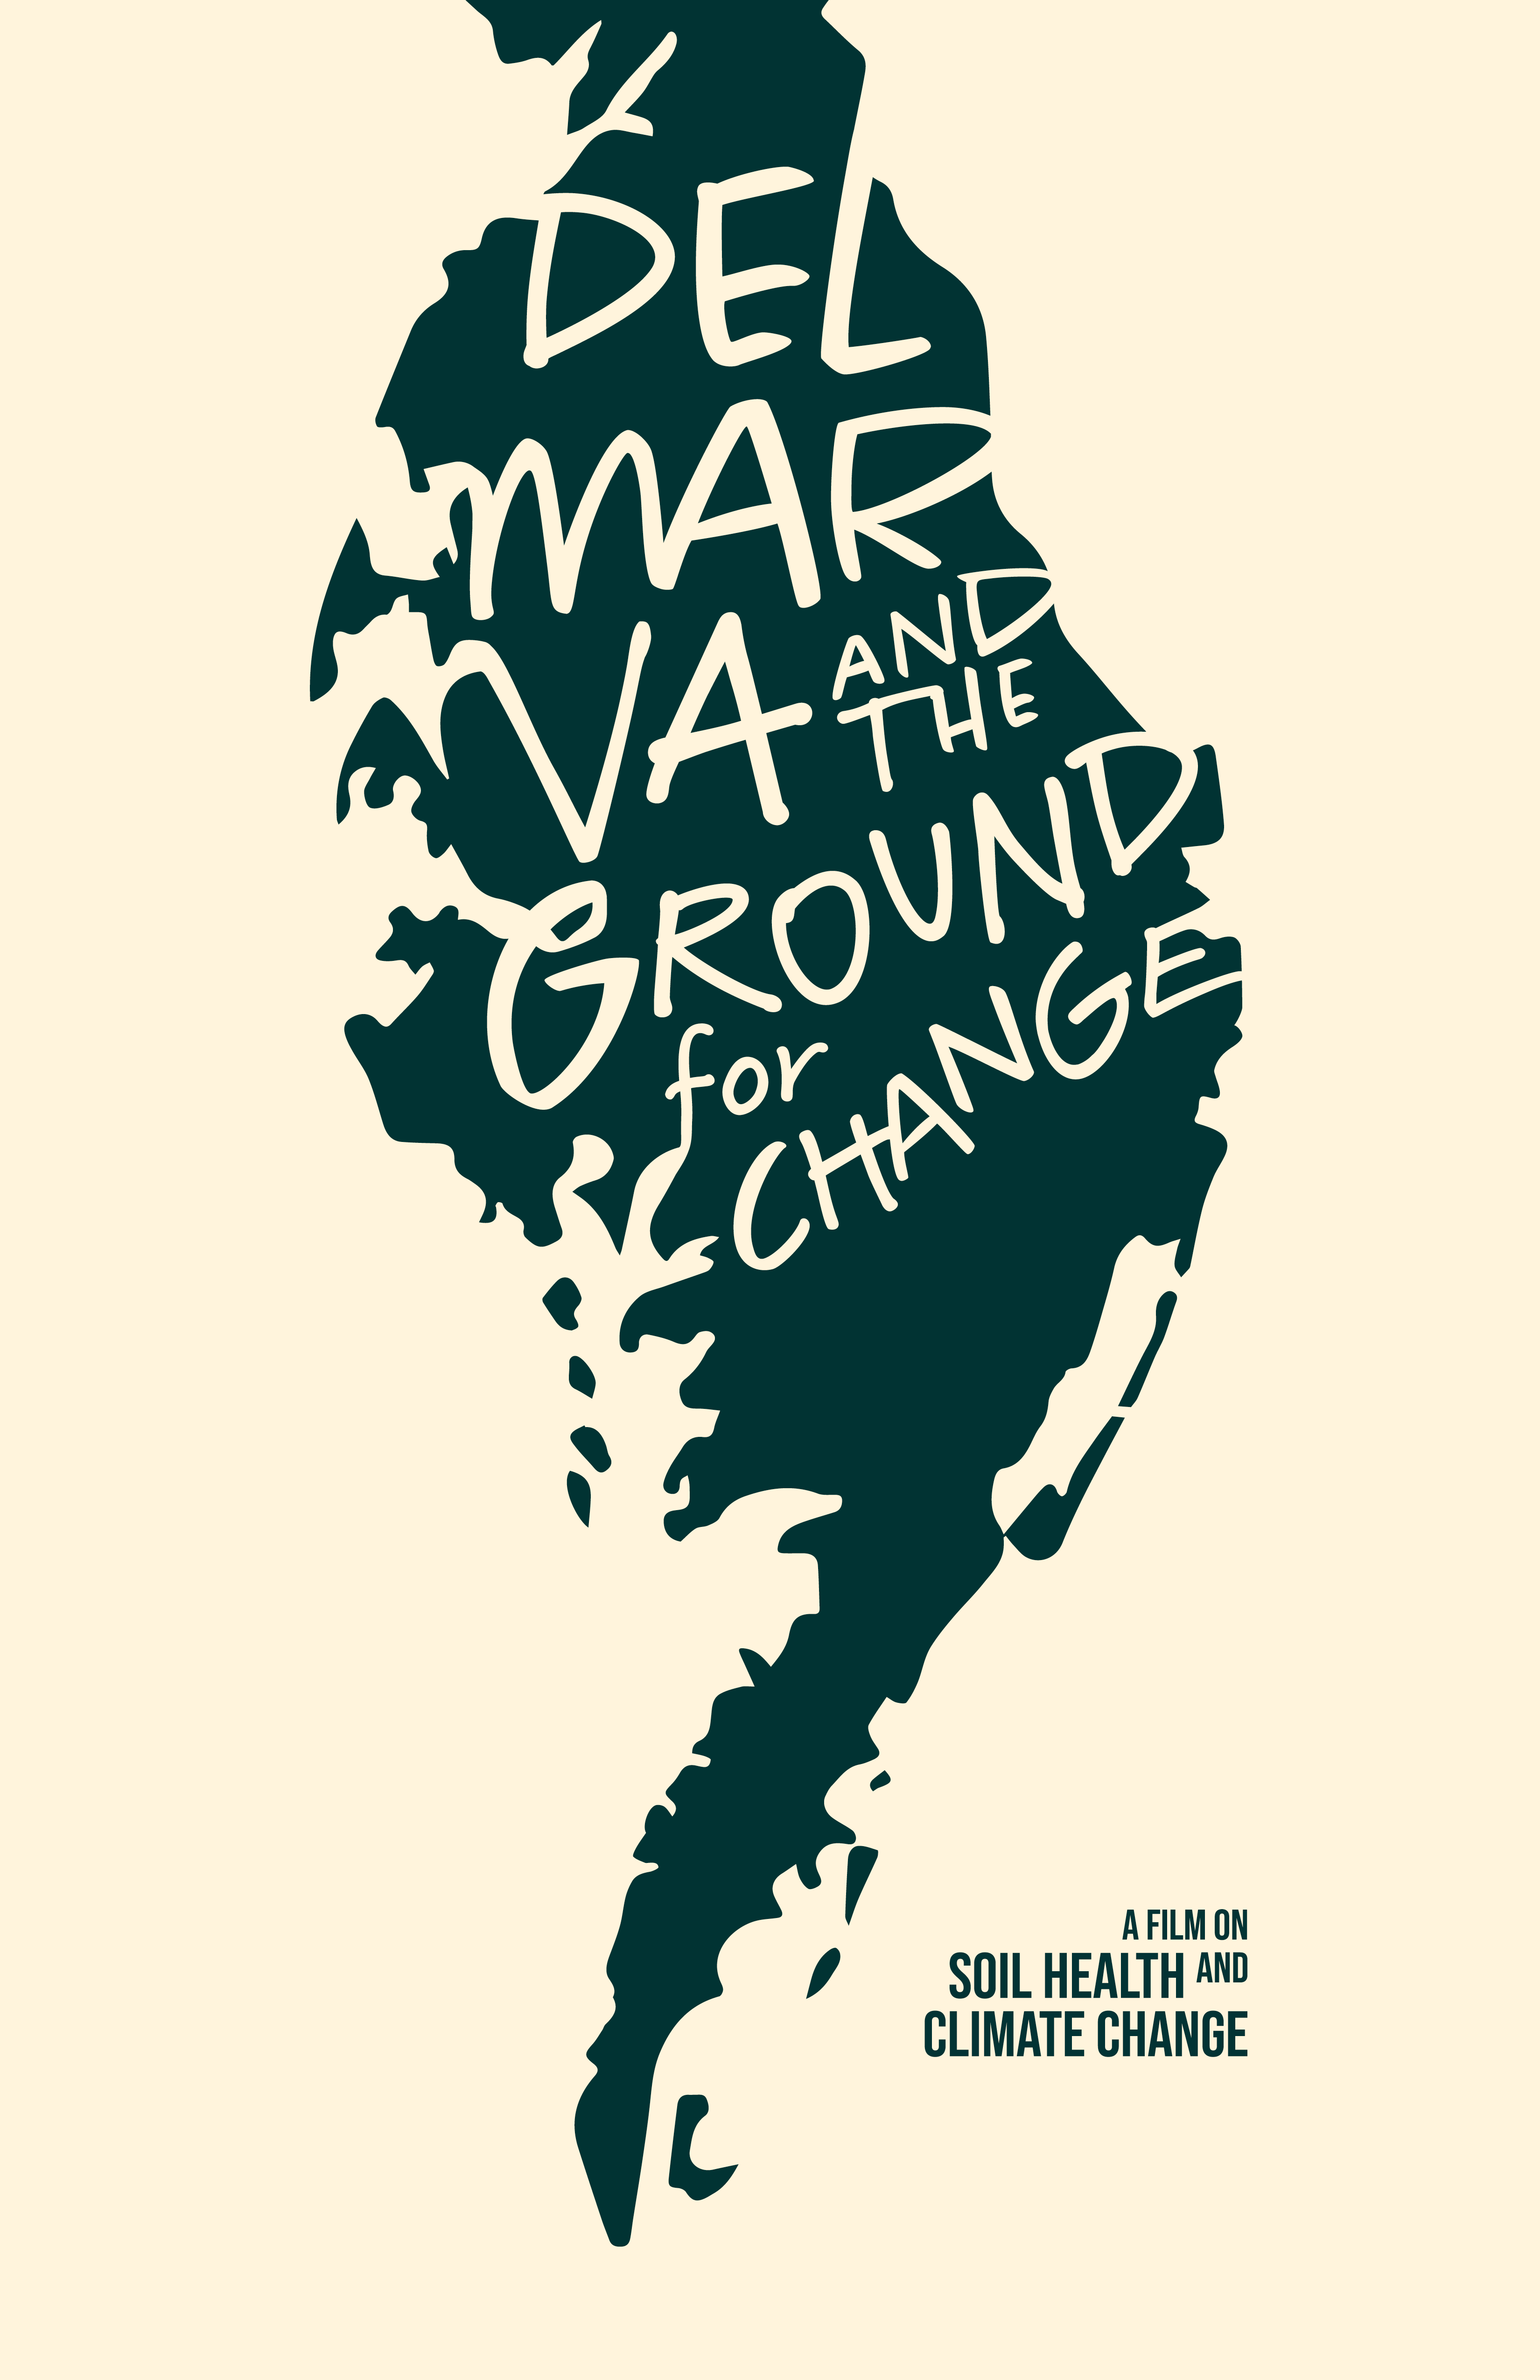 Graphic for Environmental Documentary Delmarva and the Ground for Change